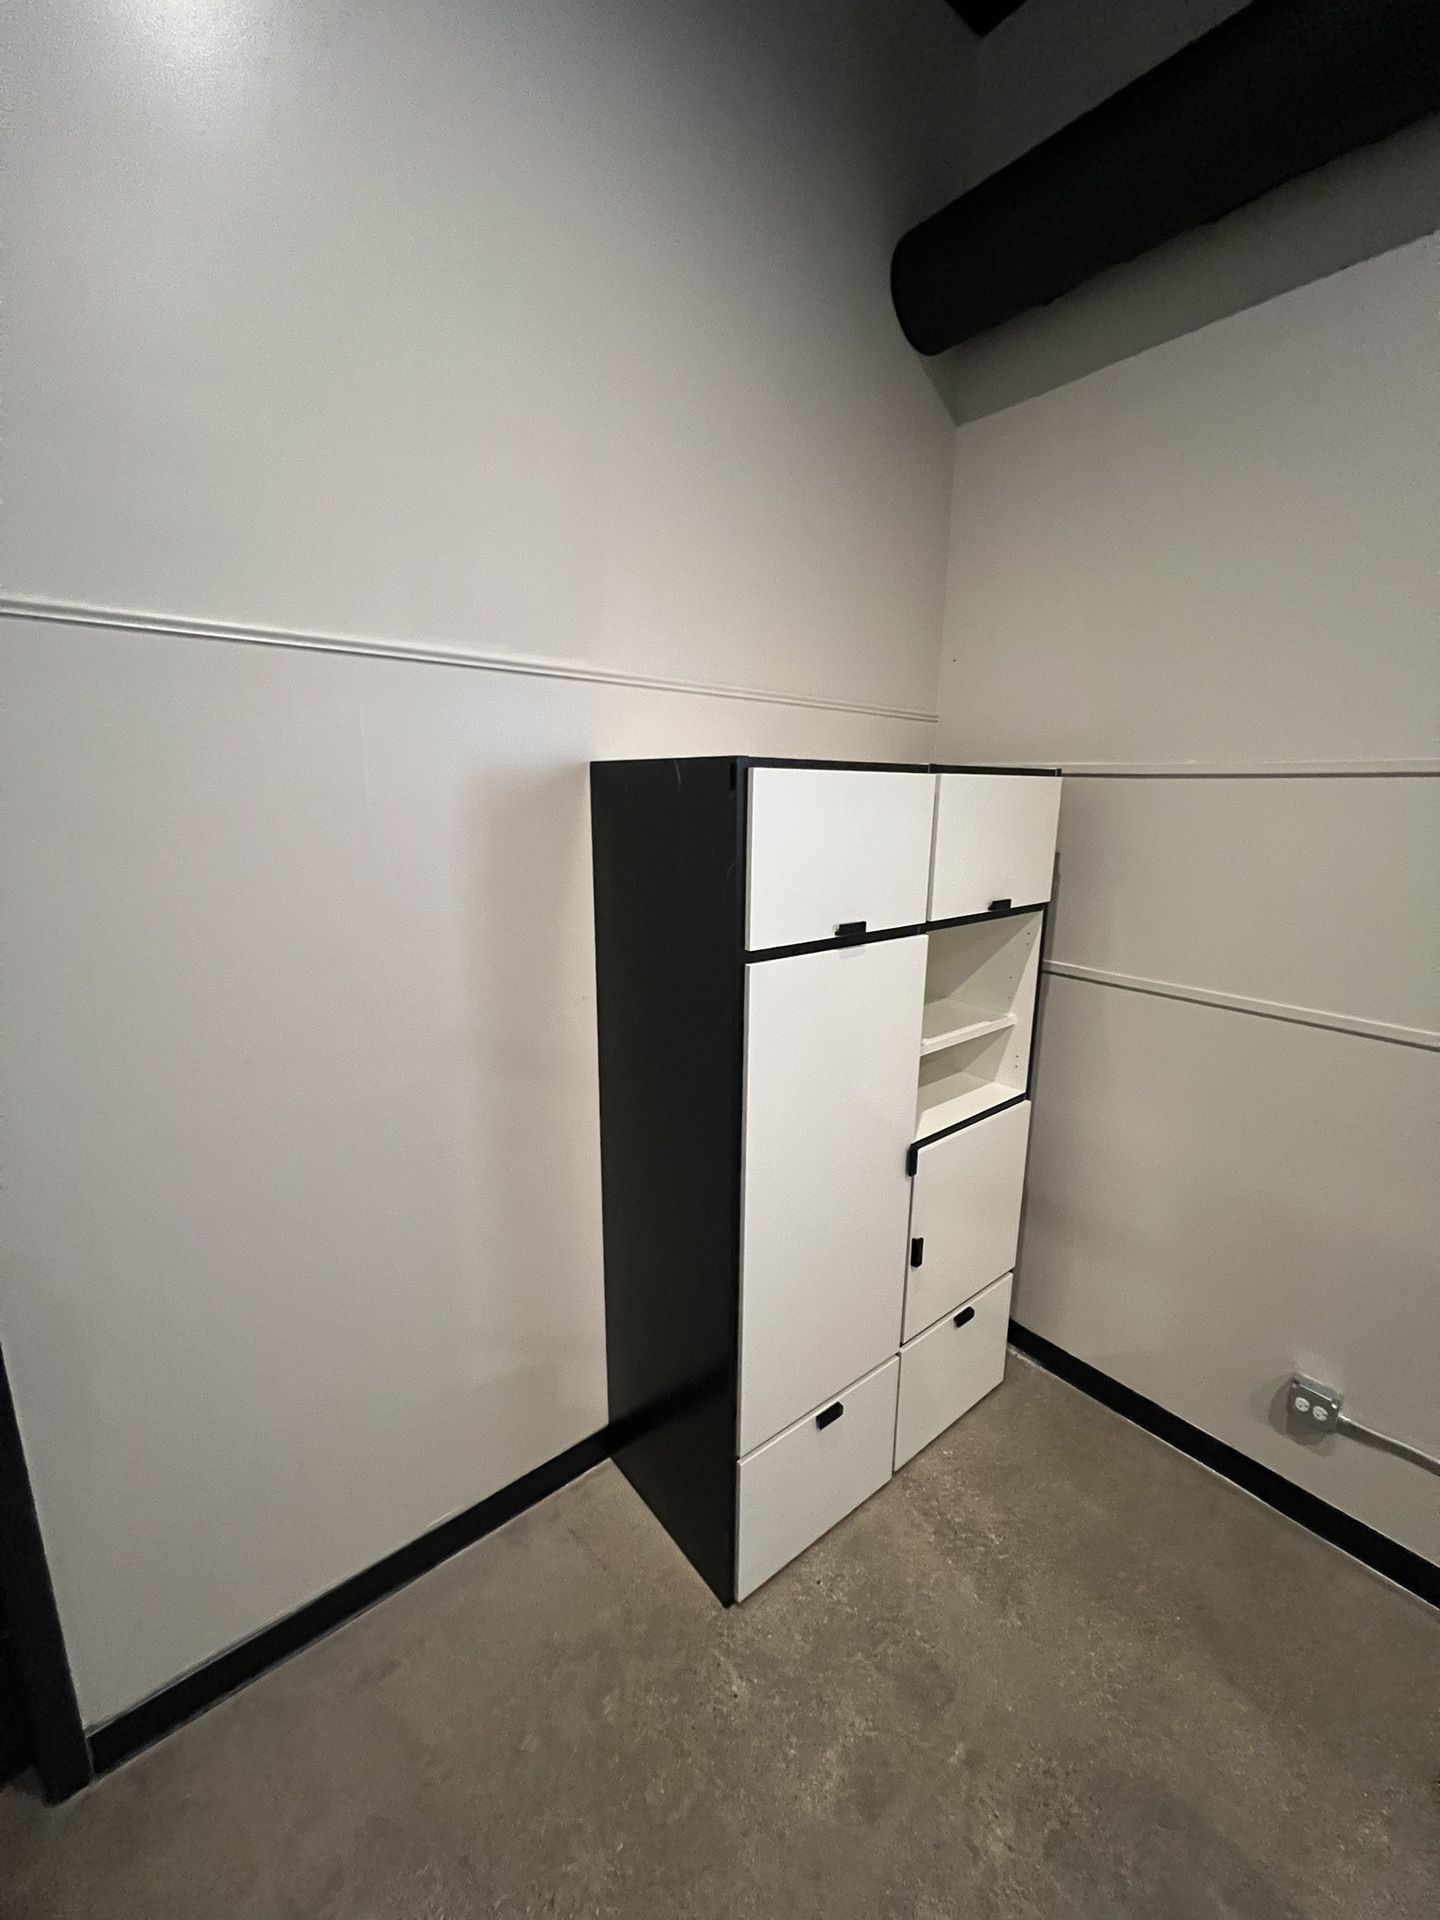 "Modern Black and White Cabinet with Drawers - Barely Used - $350 (Retail $500)"